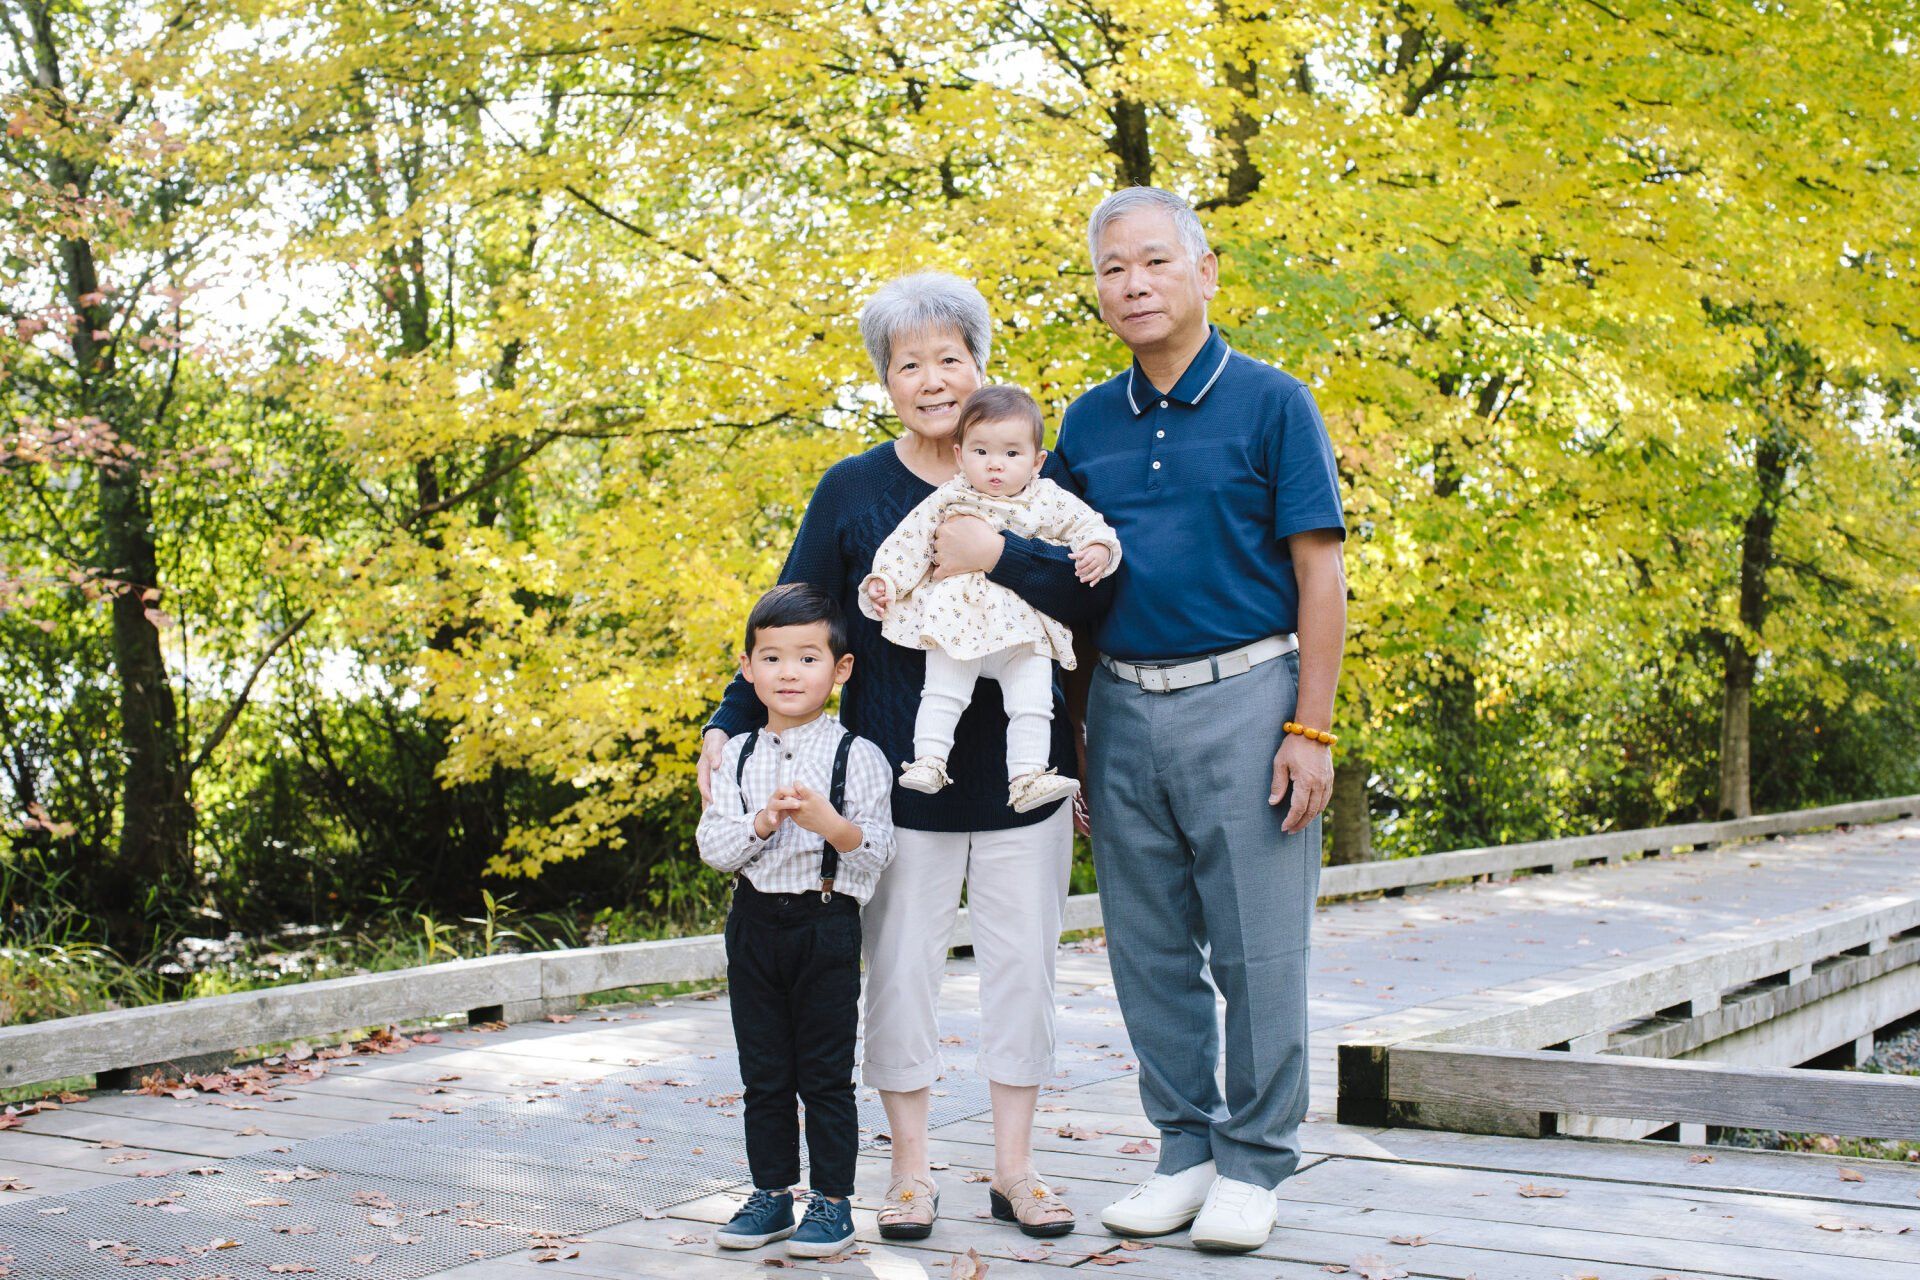 Family photo of grandparents and grandchildren in the park